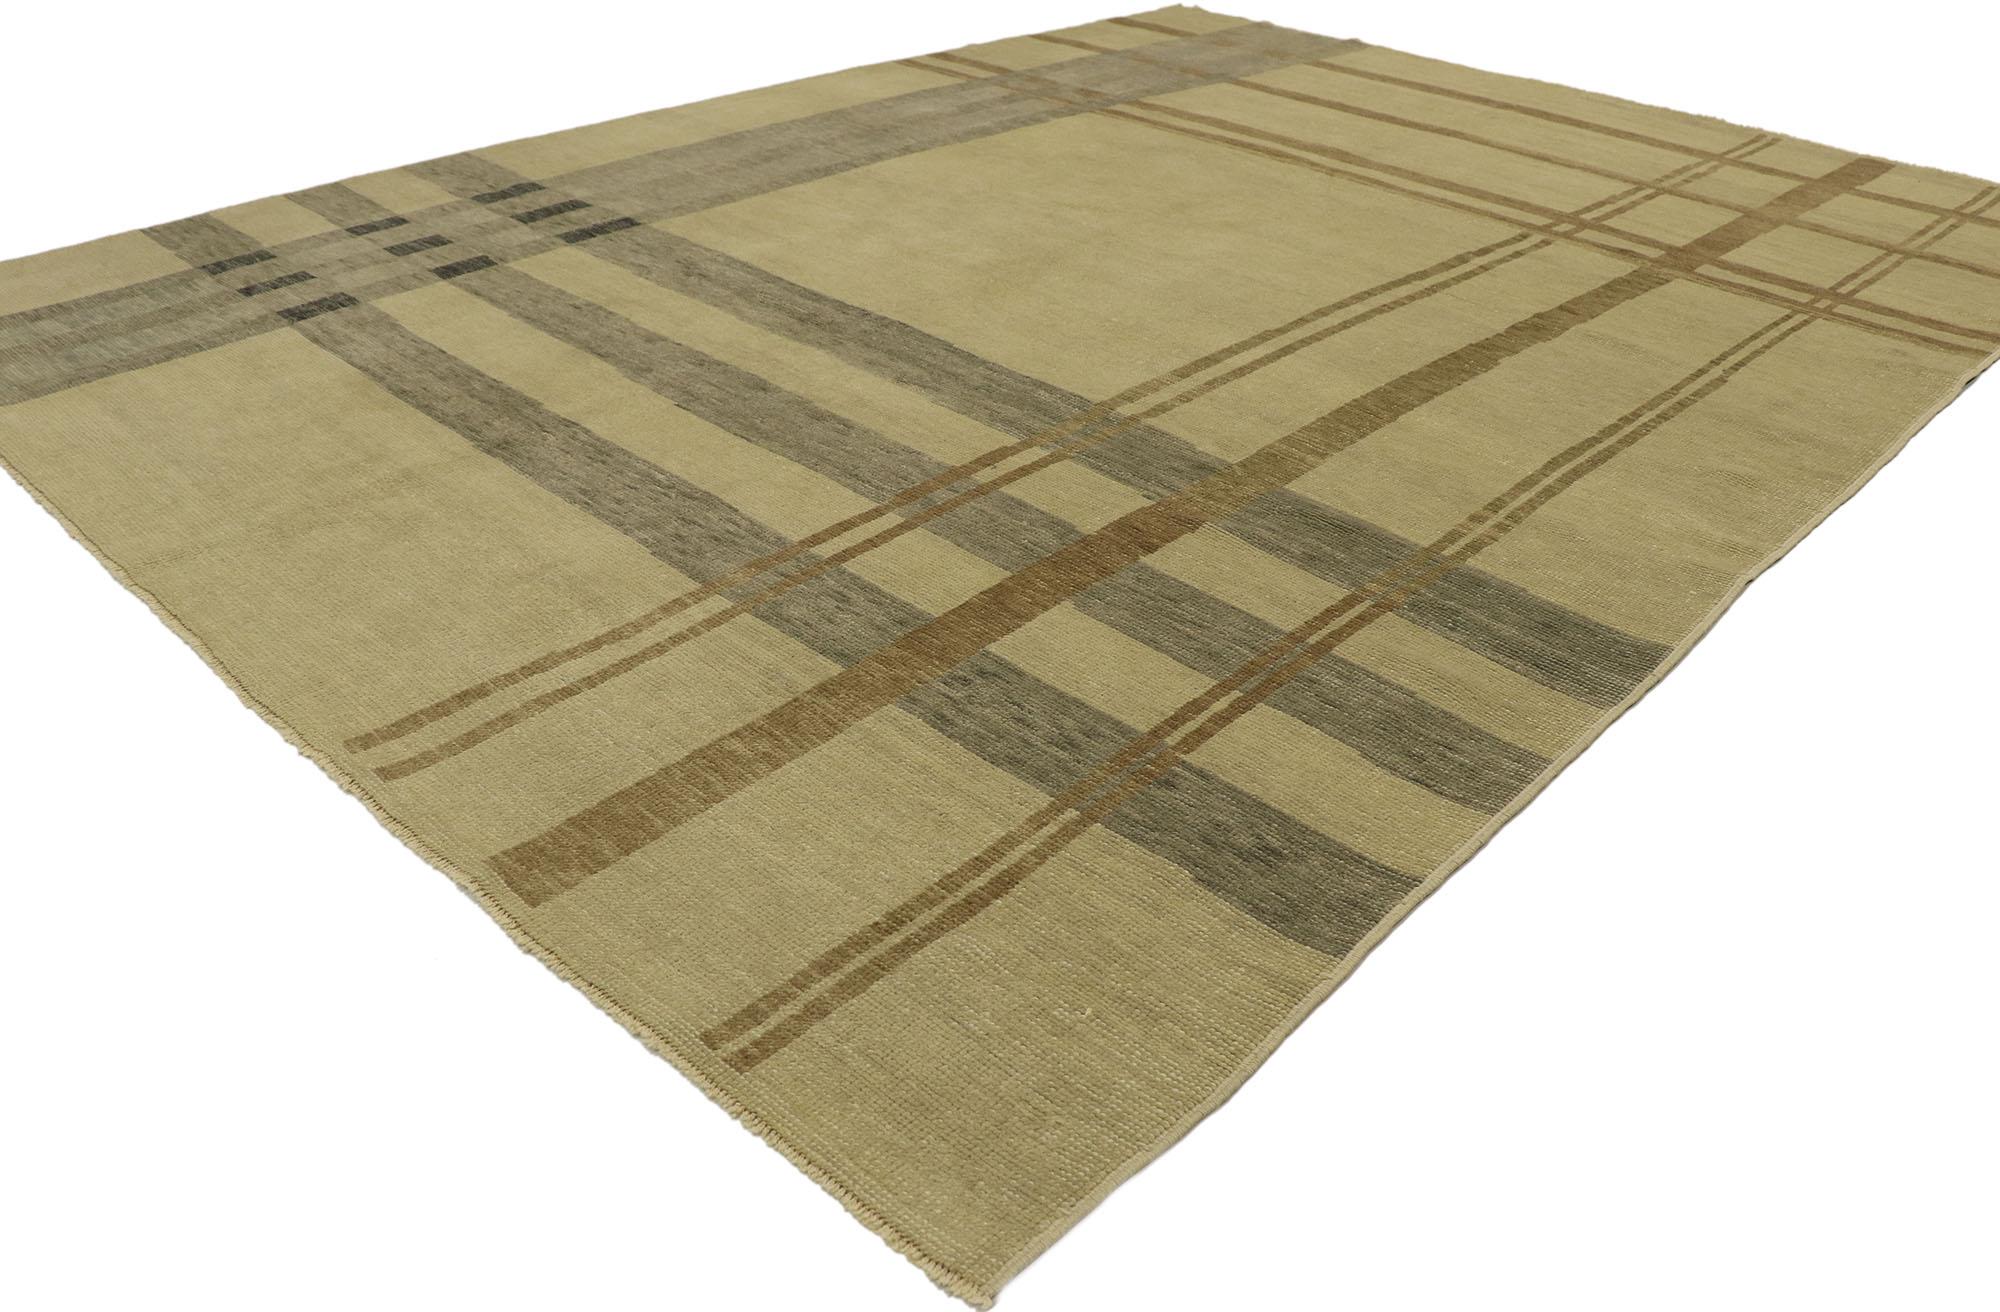 53198 New Neutral Plaid Tartan rug with ivy league style. Displaying a charming masculine appeal and the embodiment of ivy league style, this hand knotted wool contemporary plaid tartan rug is a captivating vision of woven beauty with Ralph Lauren